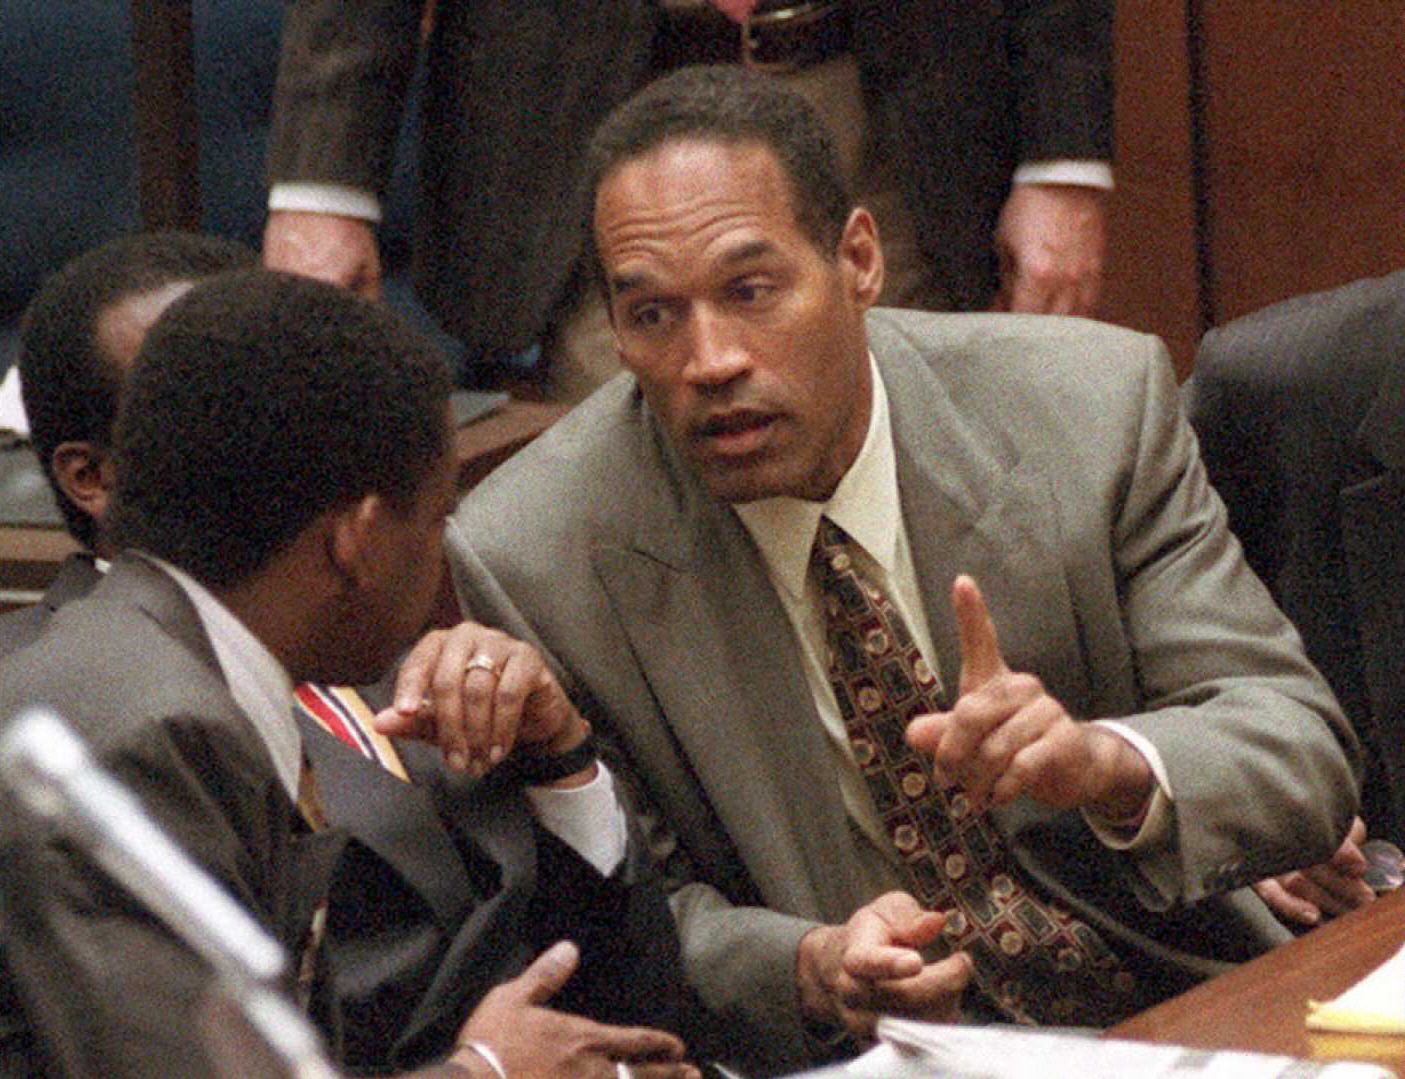 O.J. Simpson Says He'll Never Go Back To L.A. For This Reason